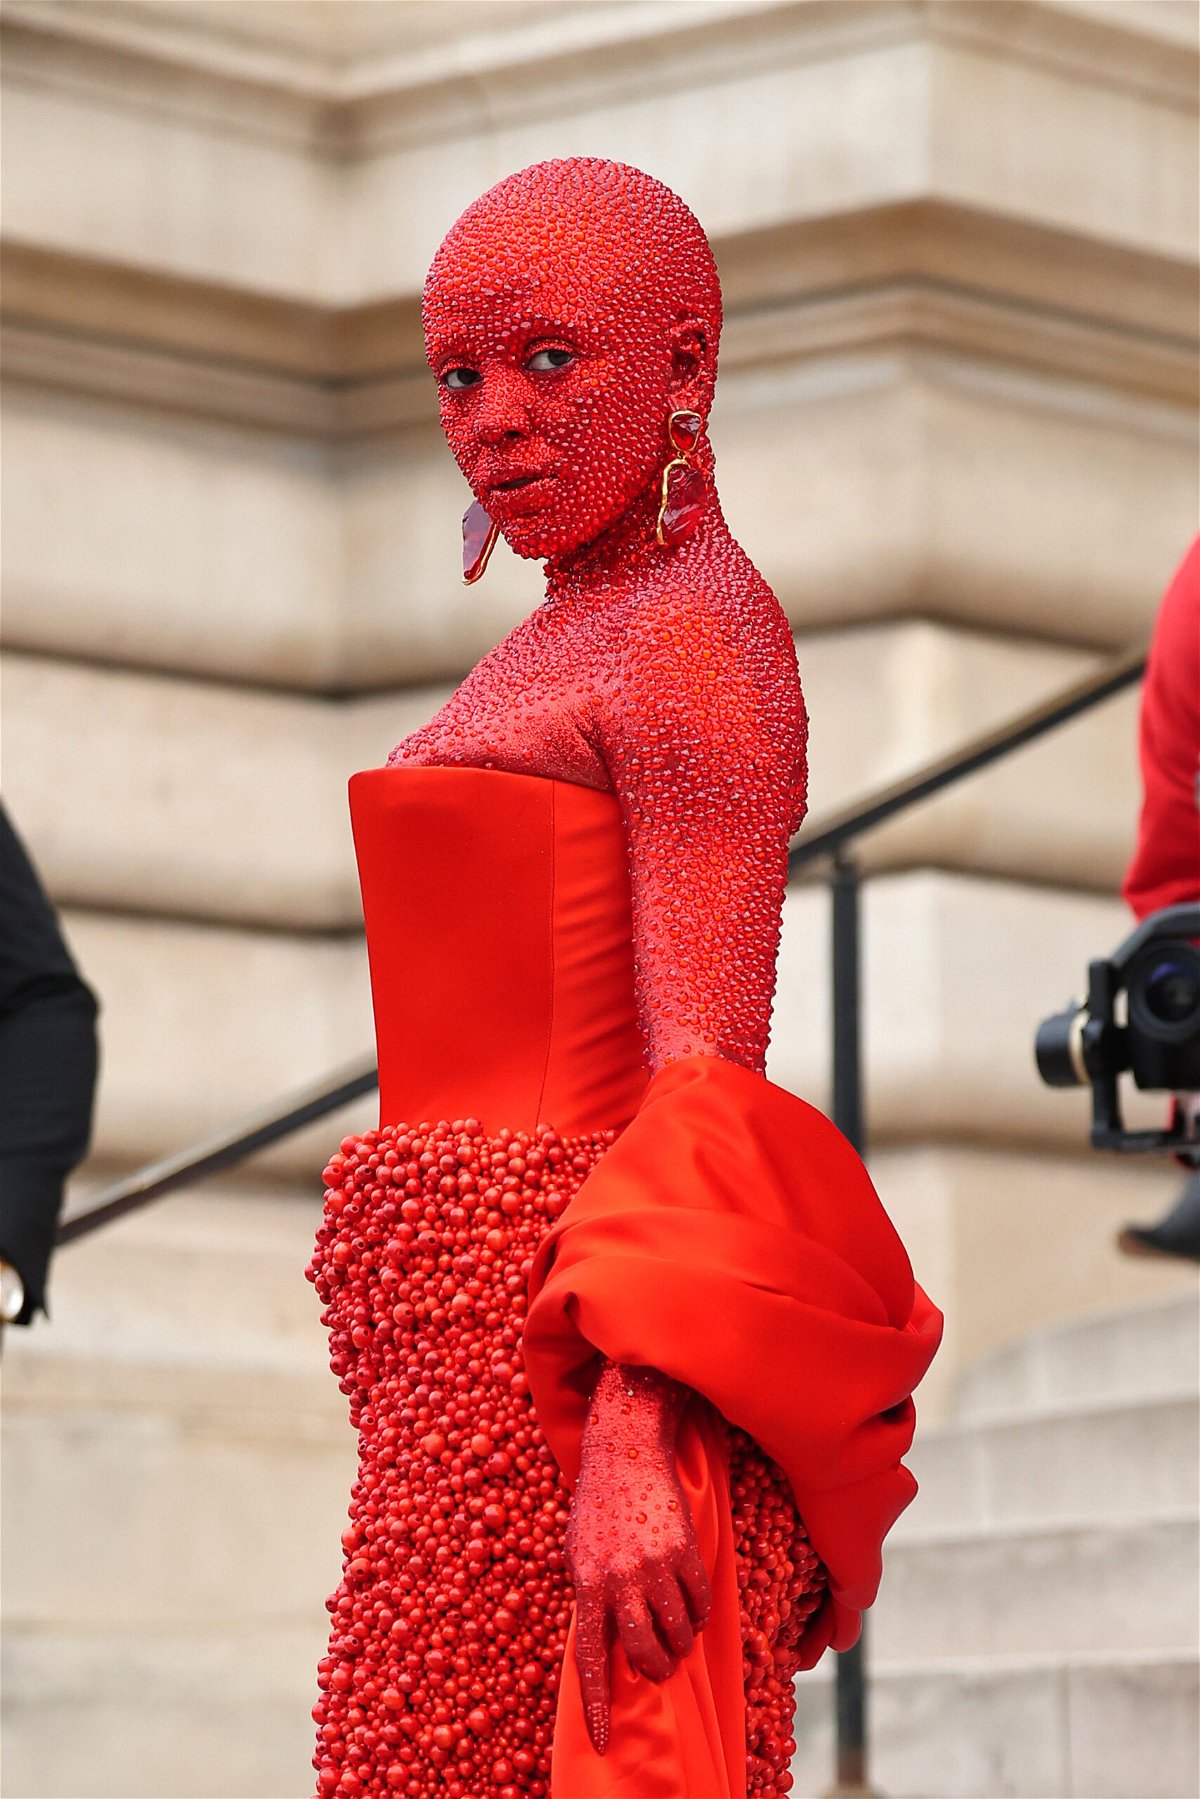 Doja Cat attends the Schiaparelli Haute Couture Spring Summer 2023 show as part of Paris Fashion Week on January 23